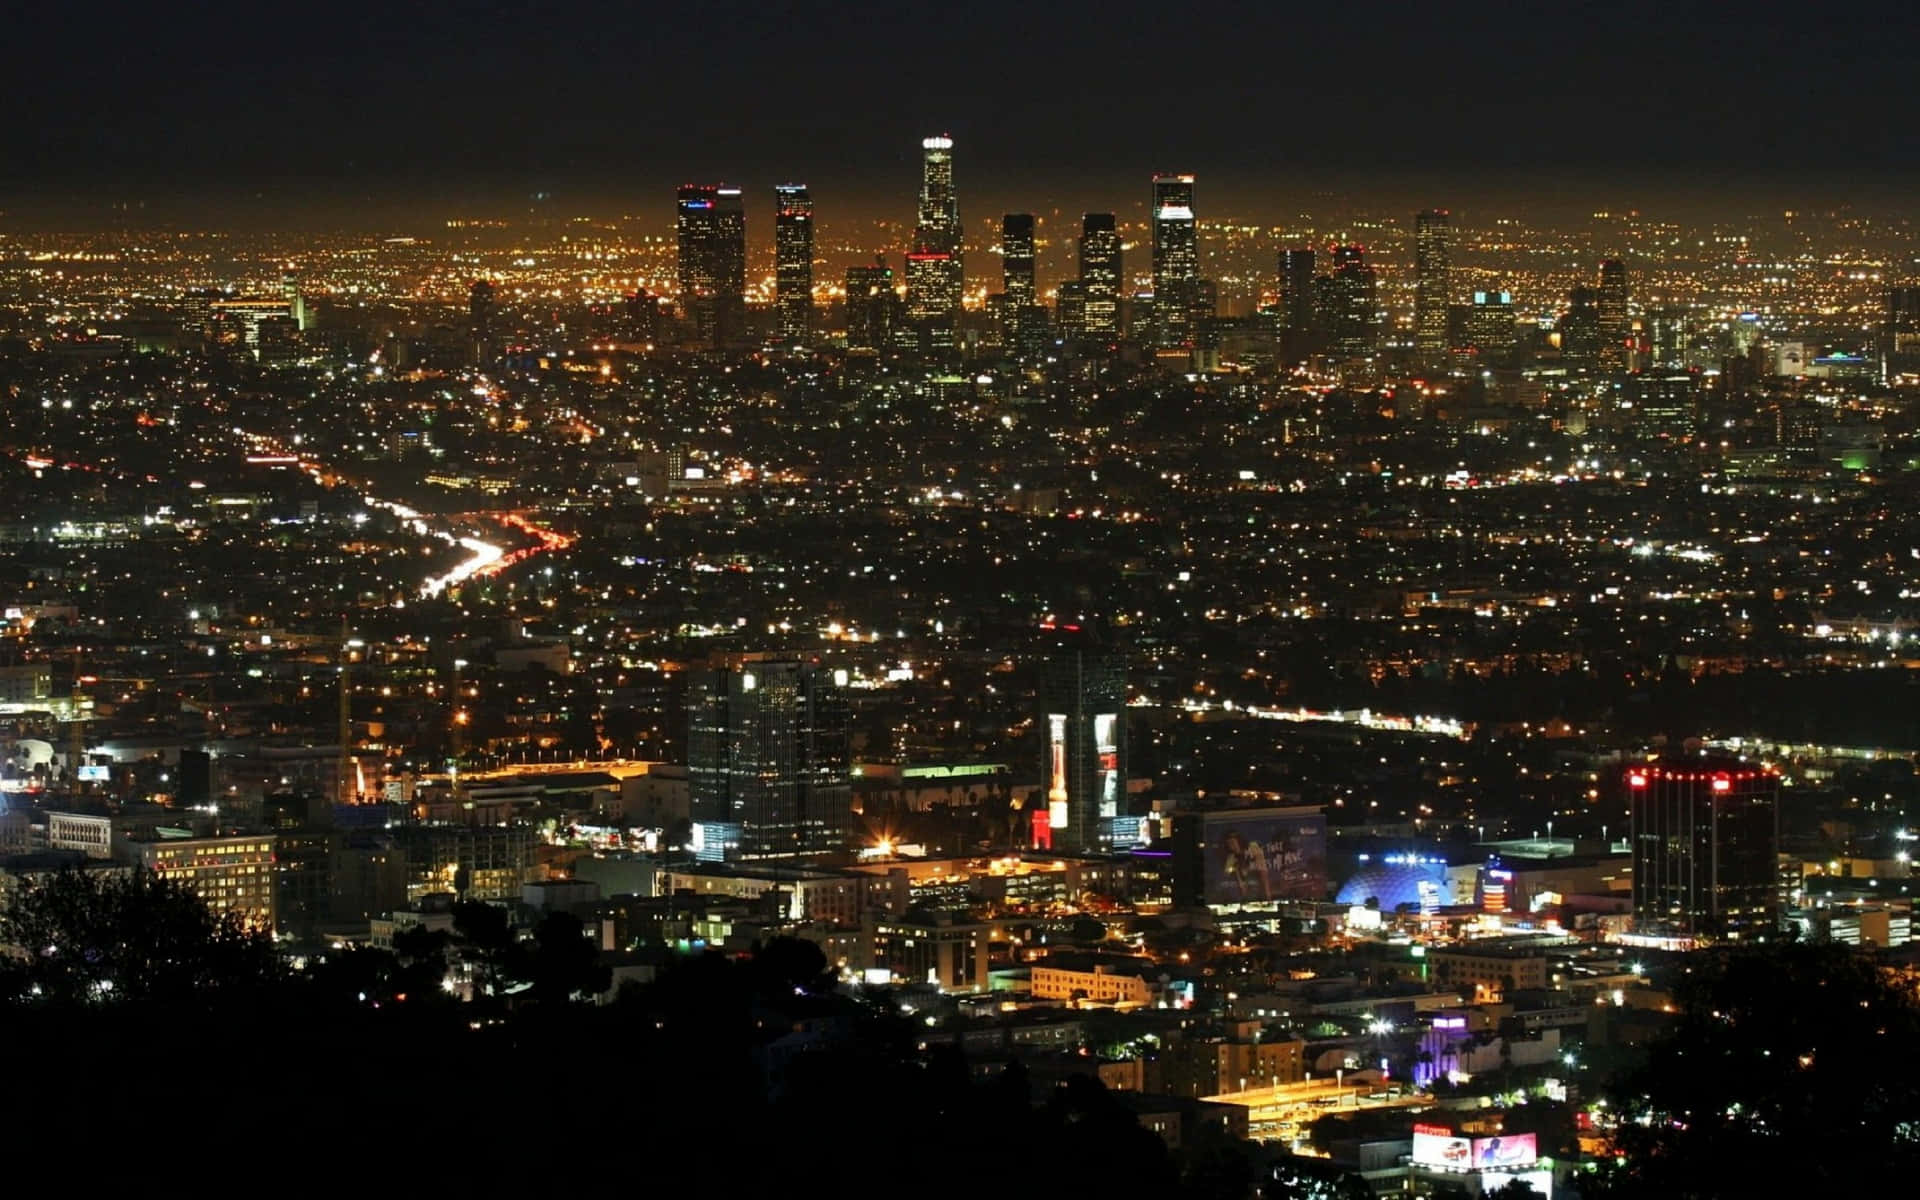 Explore the City of Angels - Los Angeles